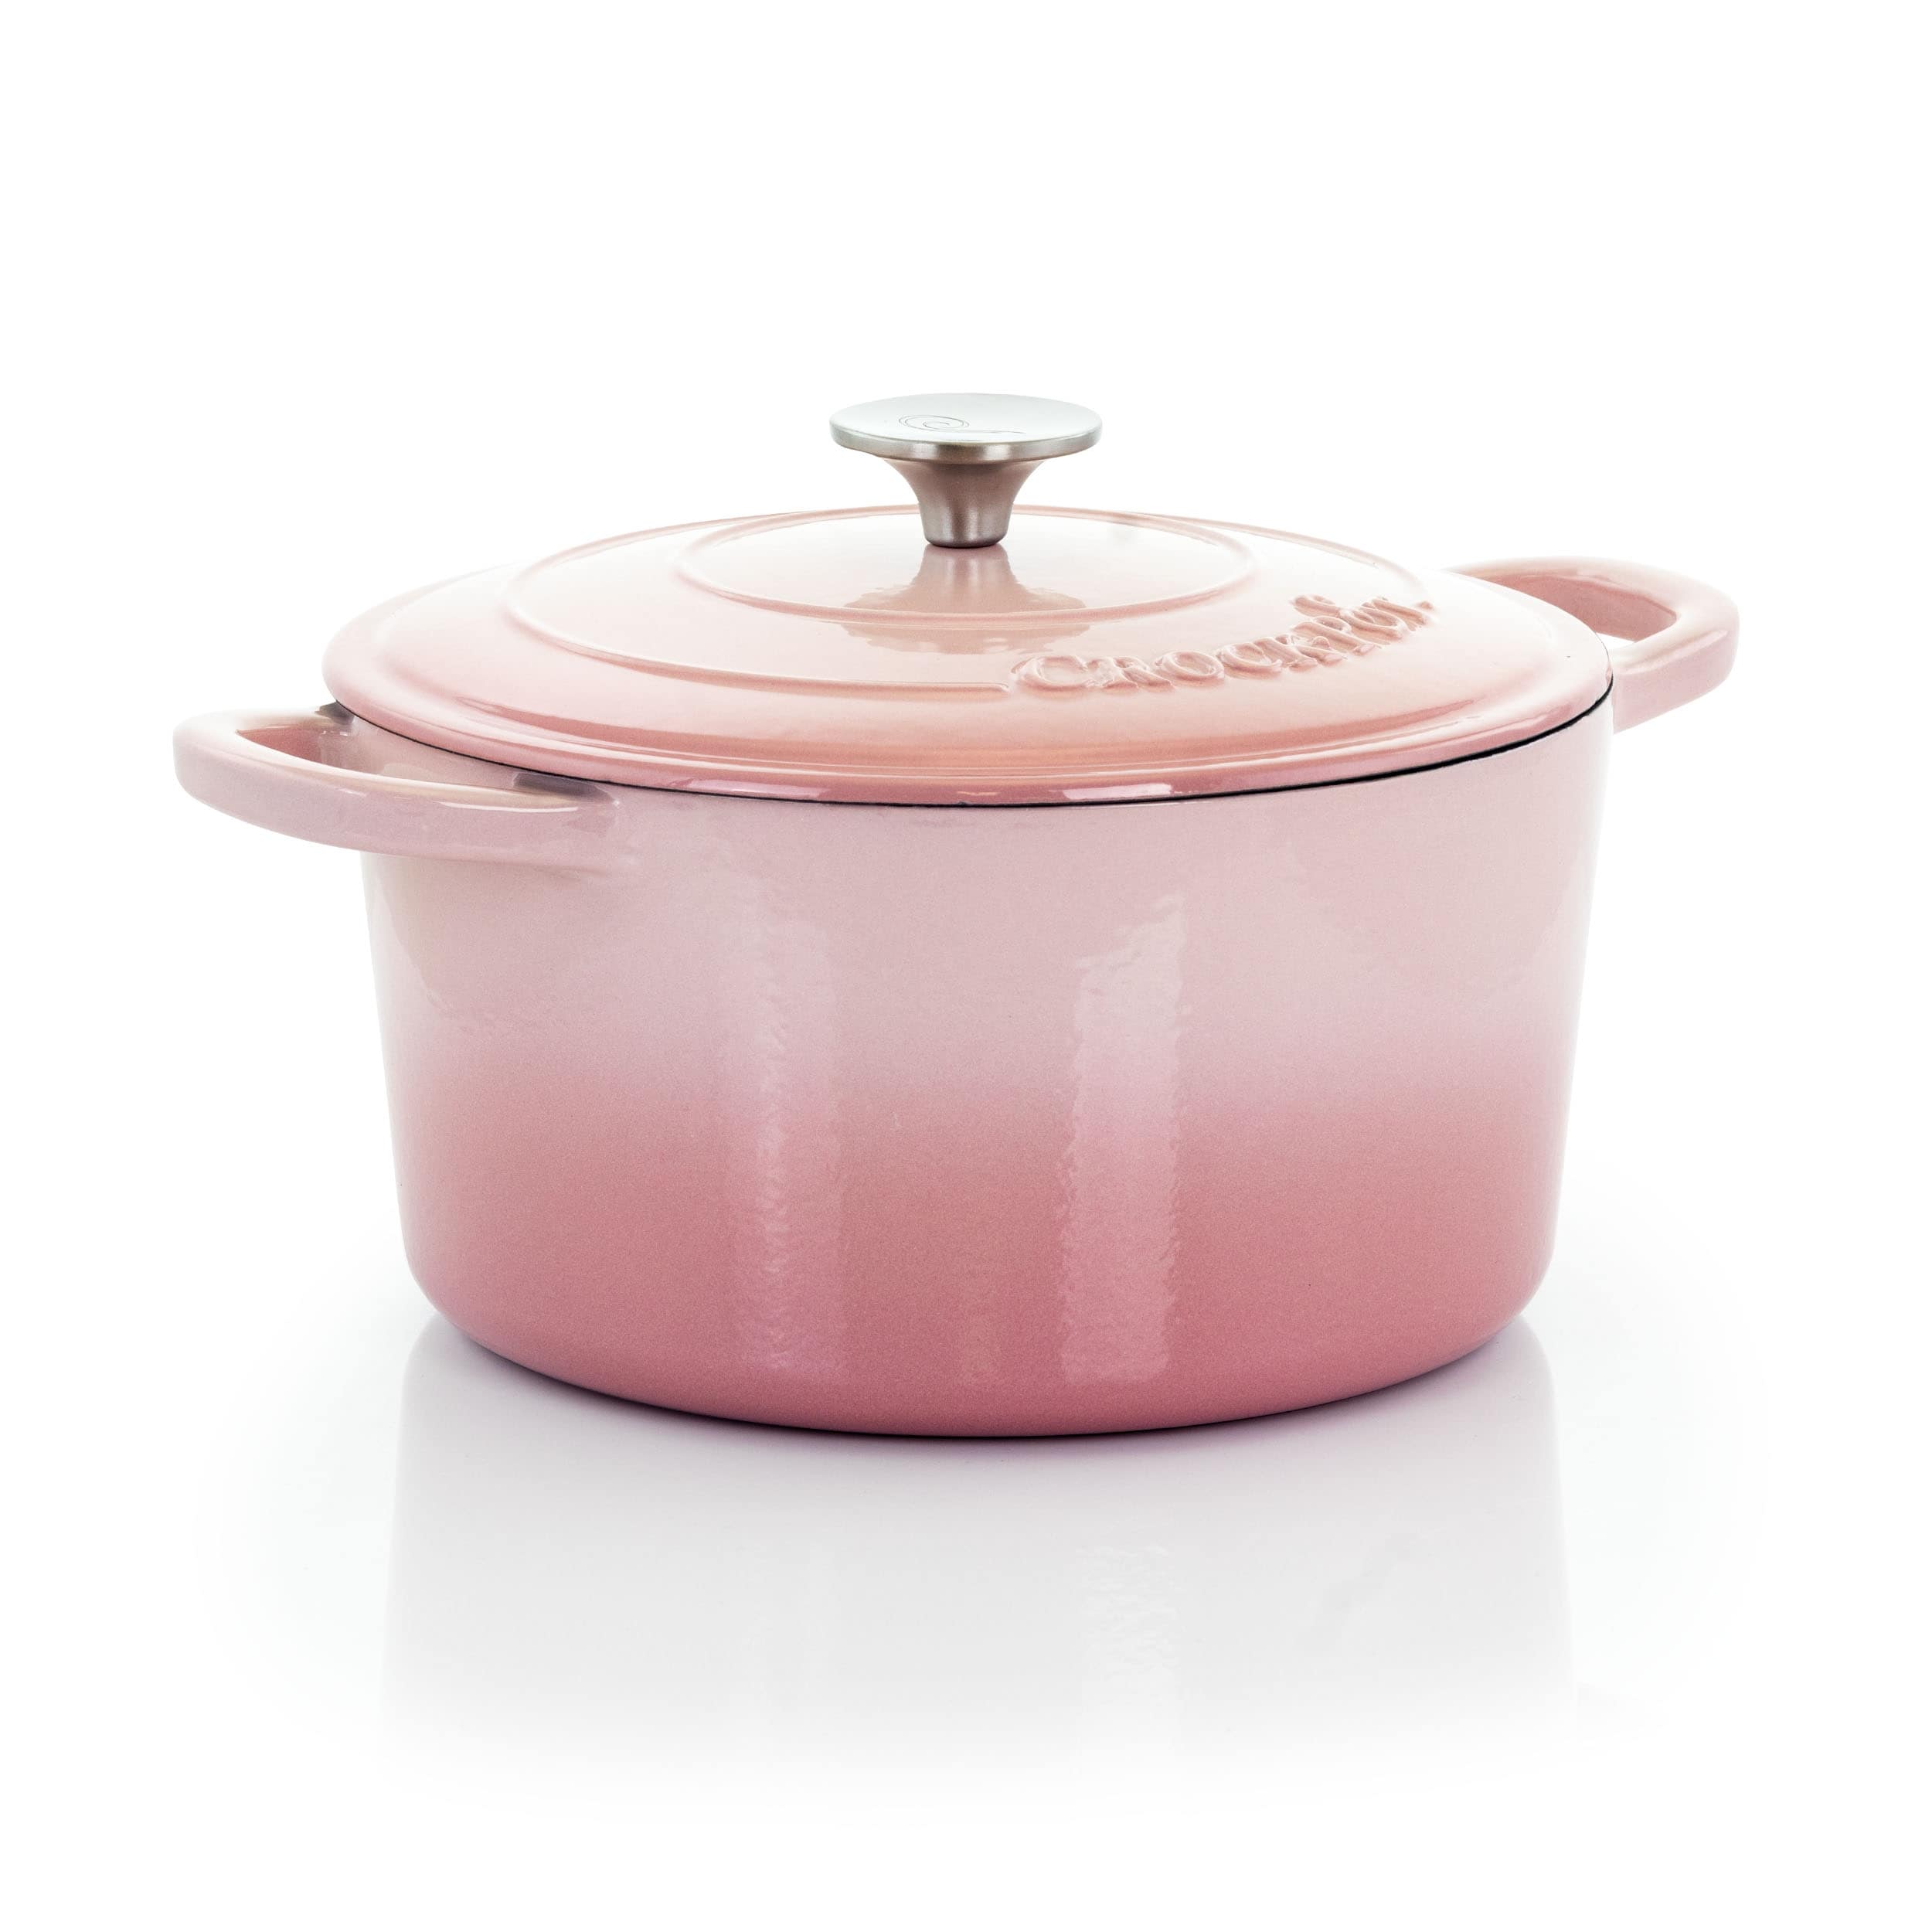 https://ak1.ostkcdn.com/images/products/is/images/direct/2db6252830ac2e834b943d0caf3a2b84363c9ce6/Crock-Pot-Artisan-2-Piece-5-Quarts-Enamled-Cast-Iron-Dutch-Oven-in-Blush-Pink.jpg